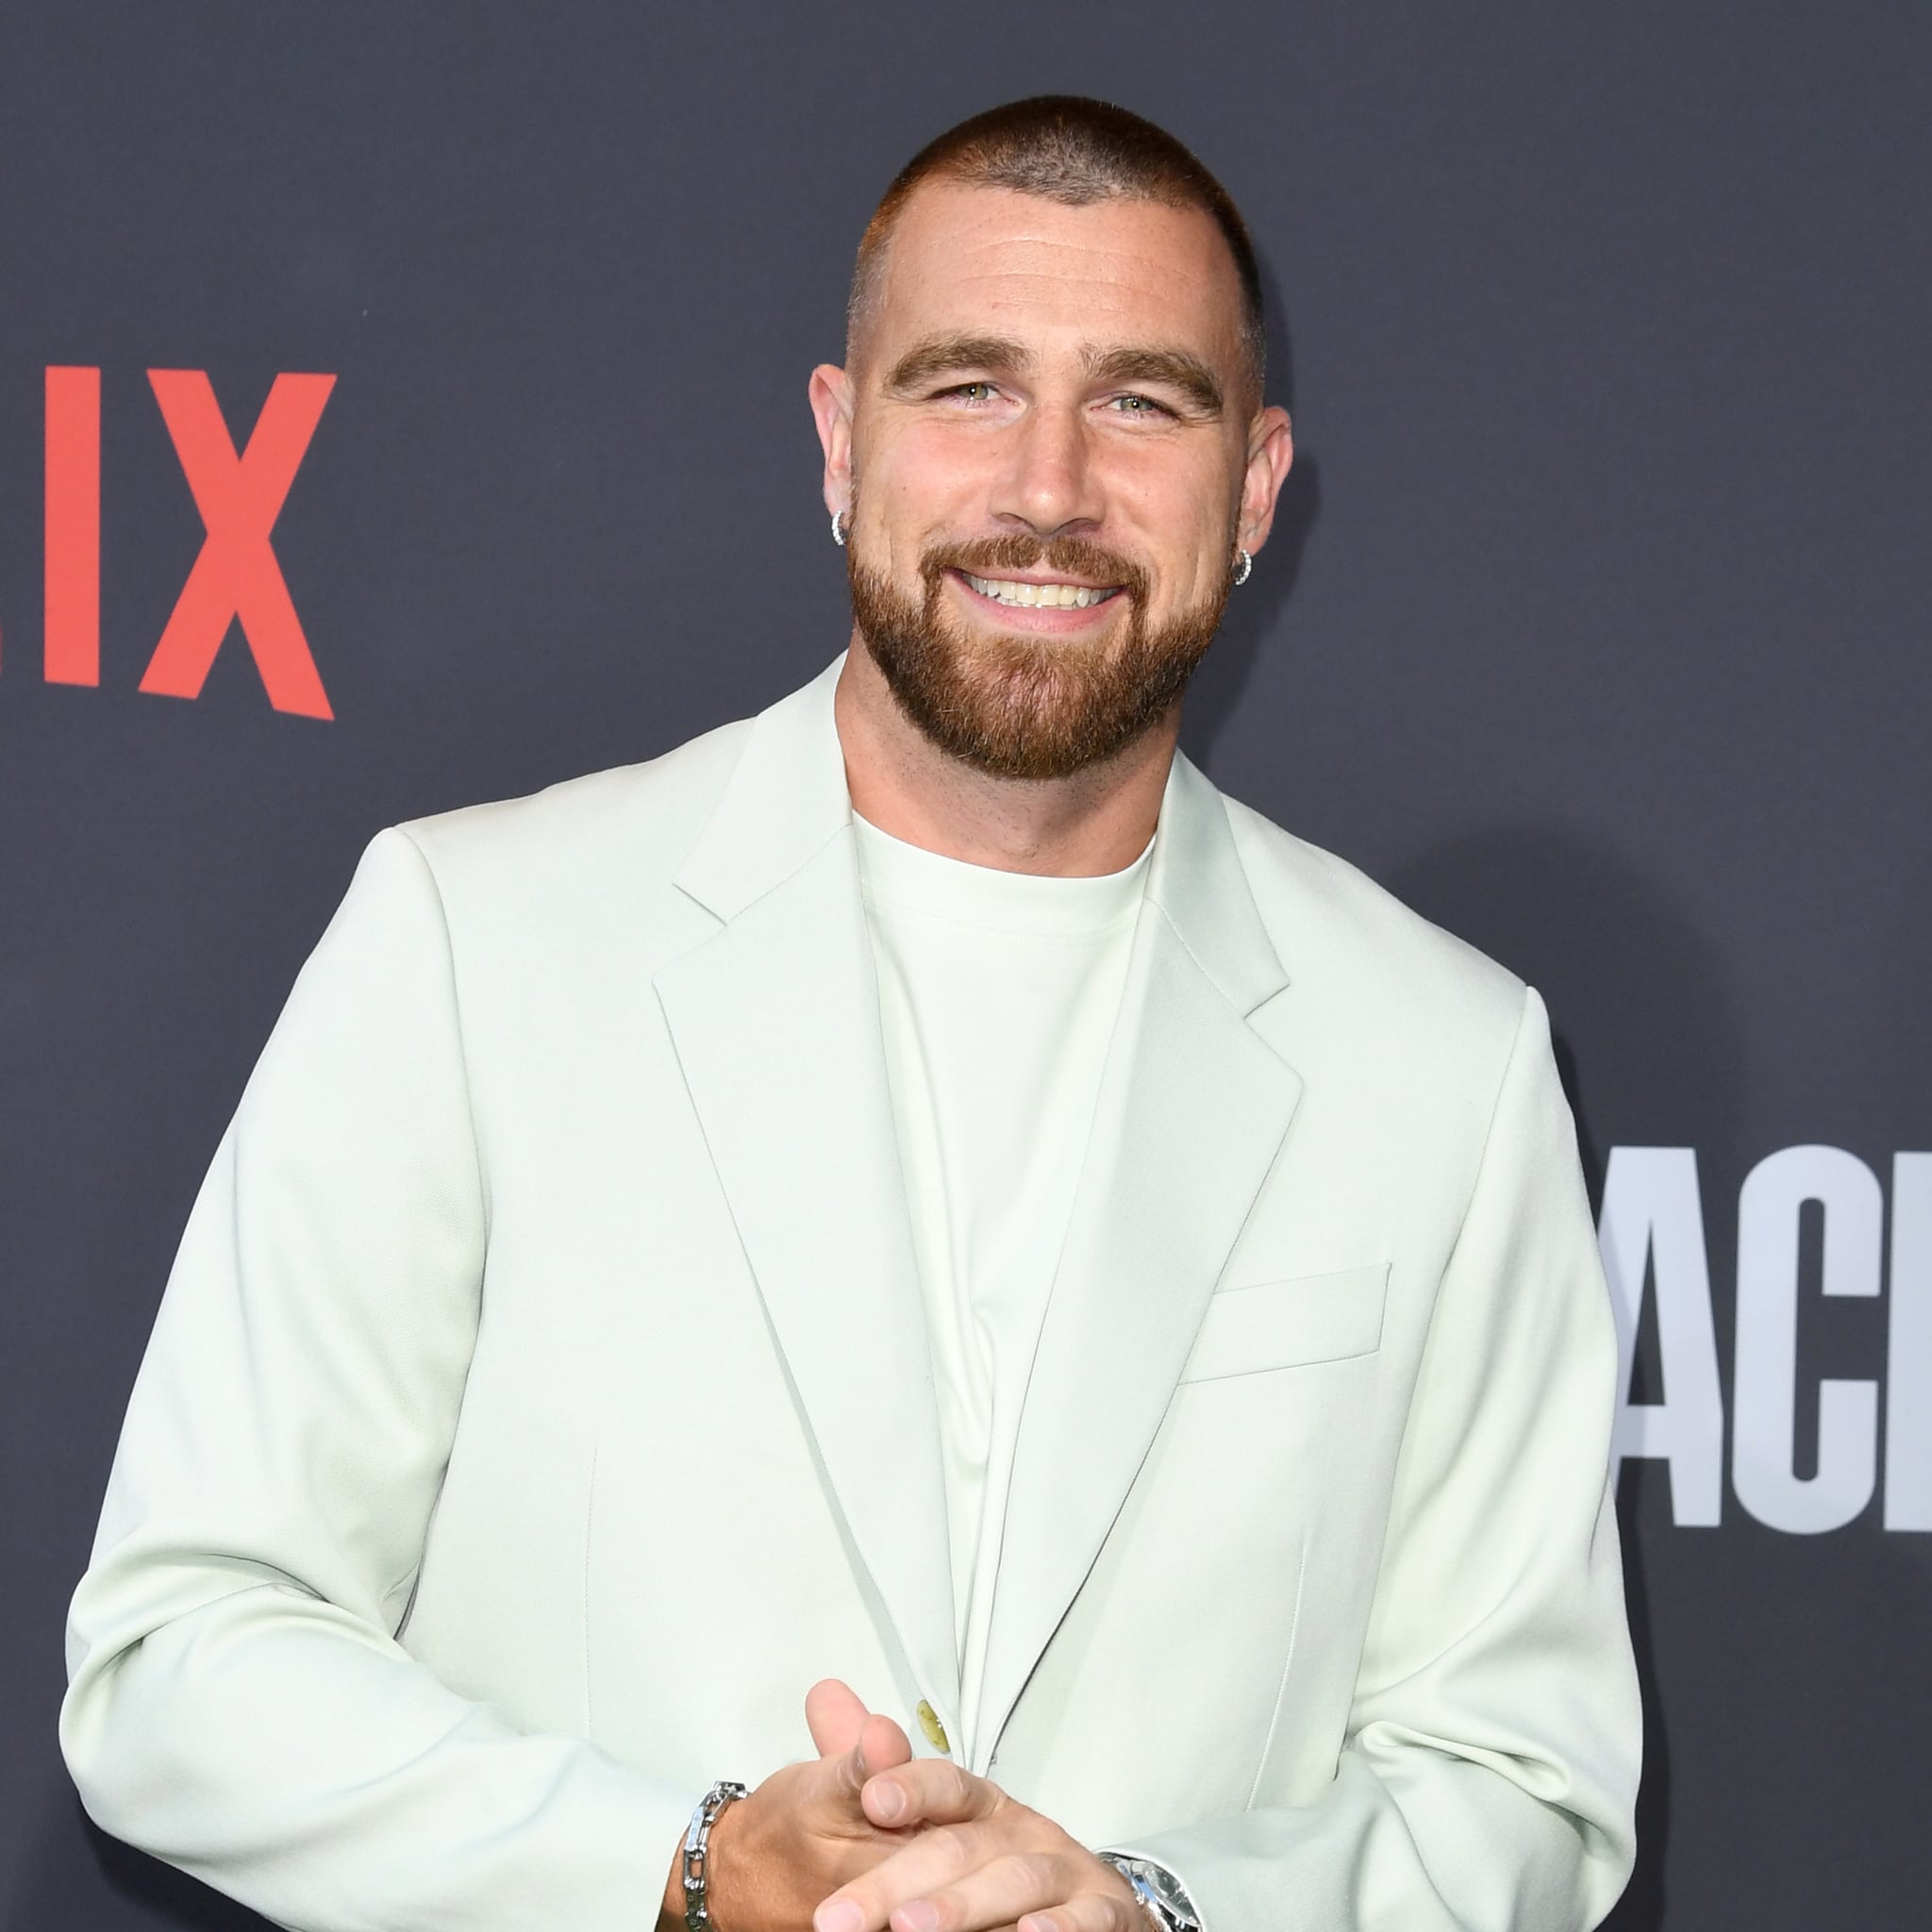 Chiefs star Travis Kelce reveals New Year's resolution: 'I'm done